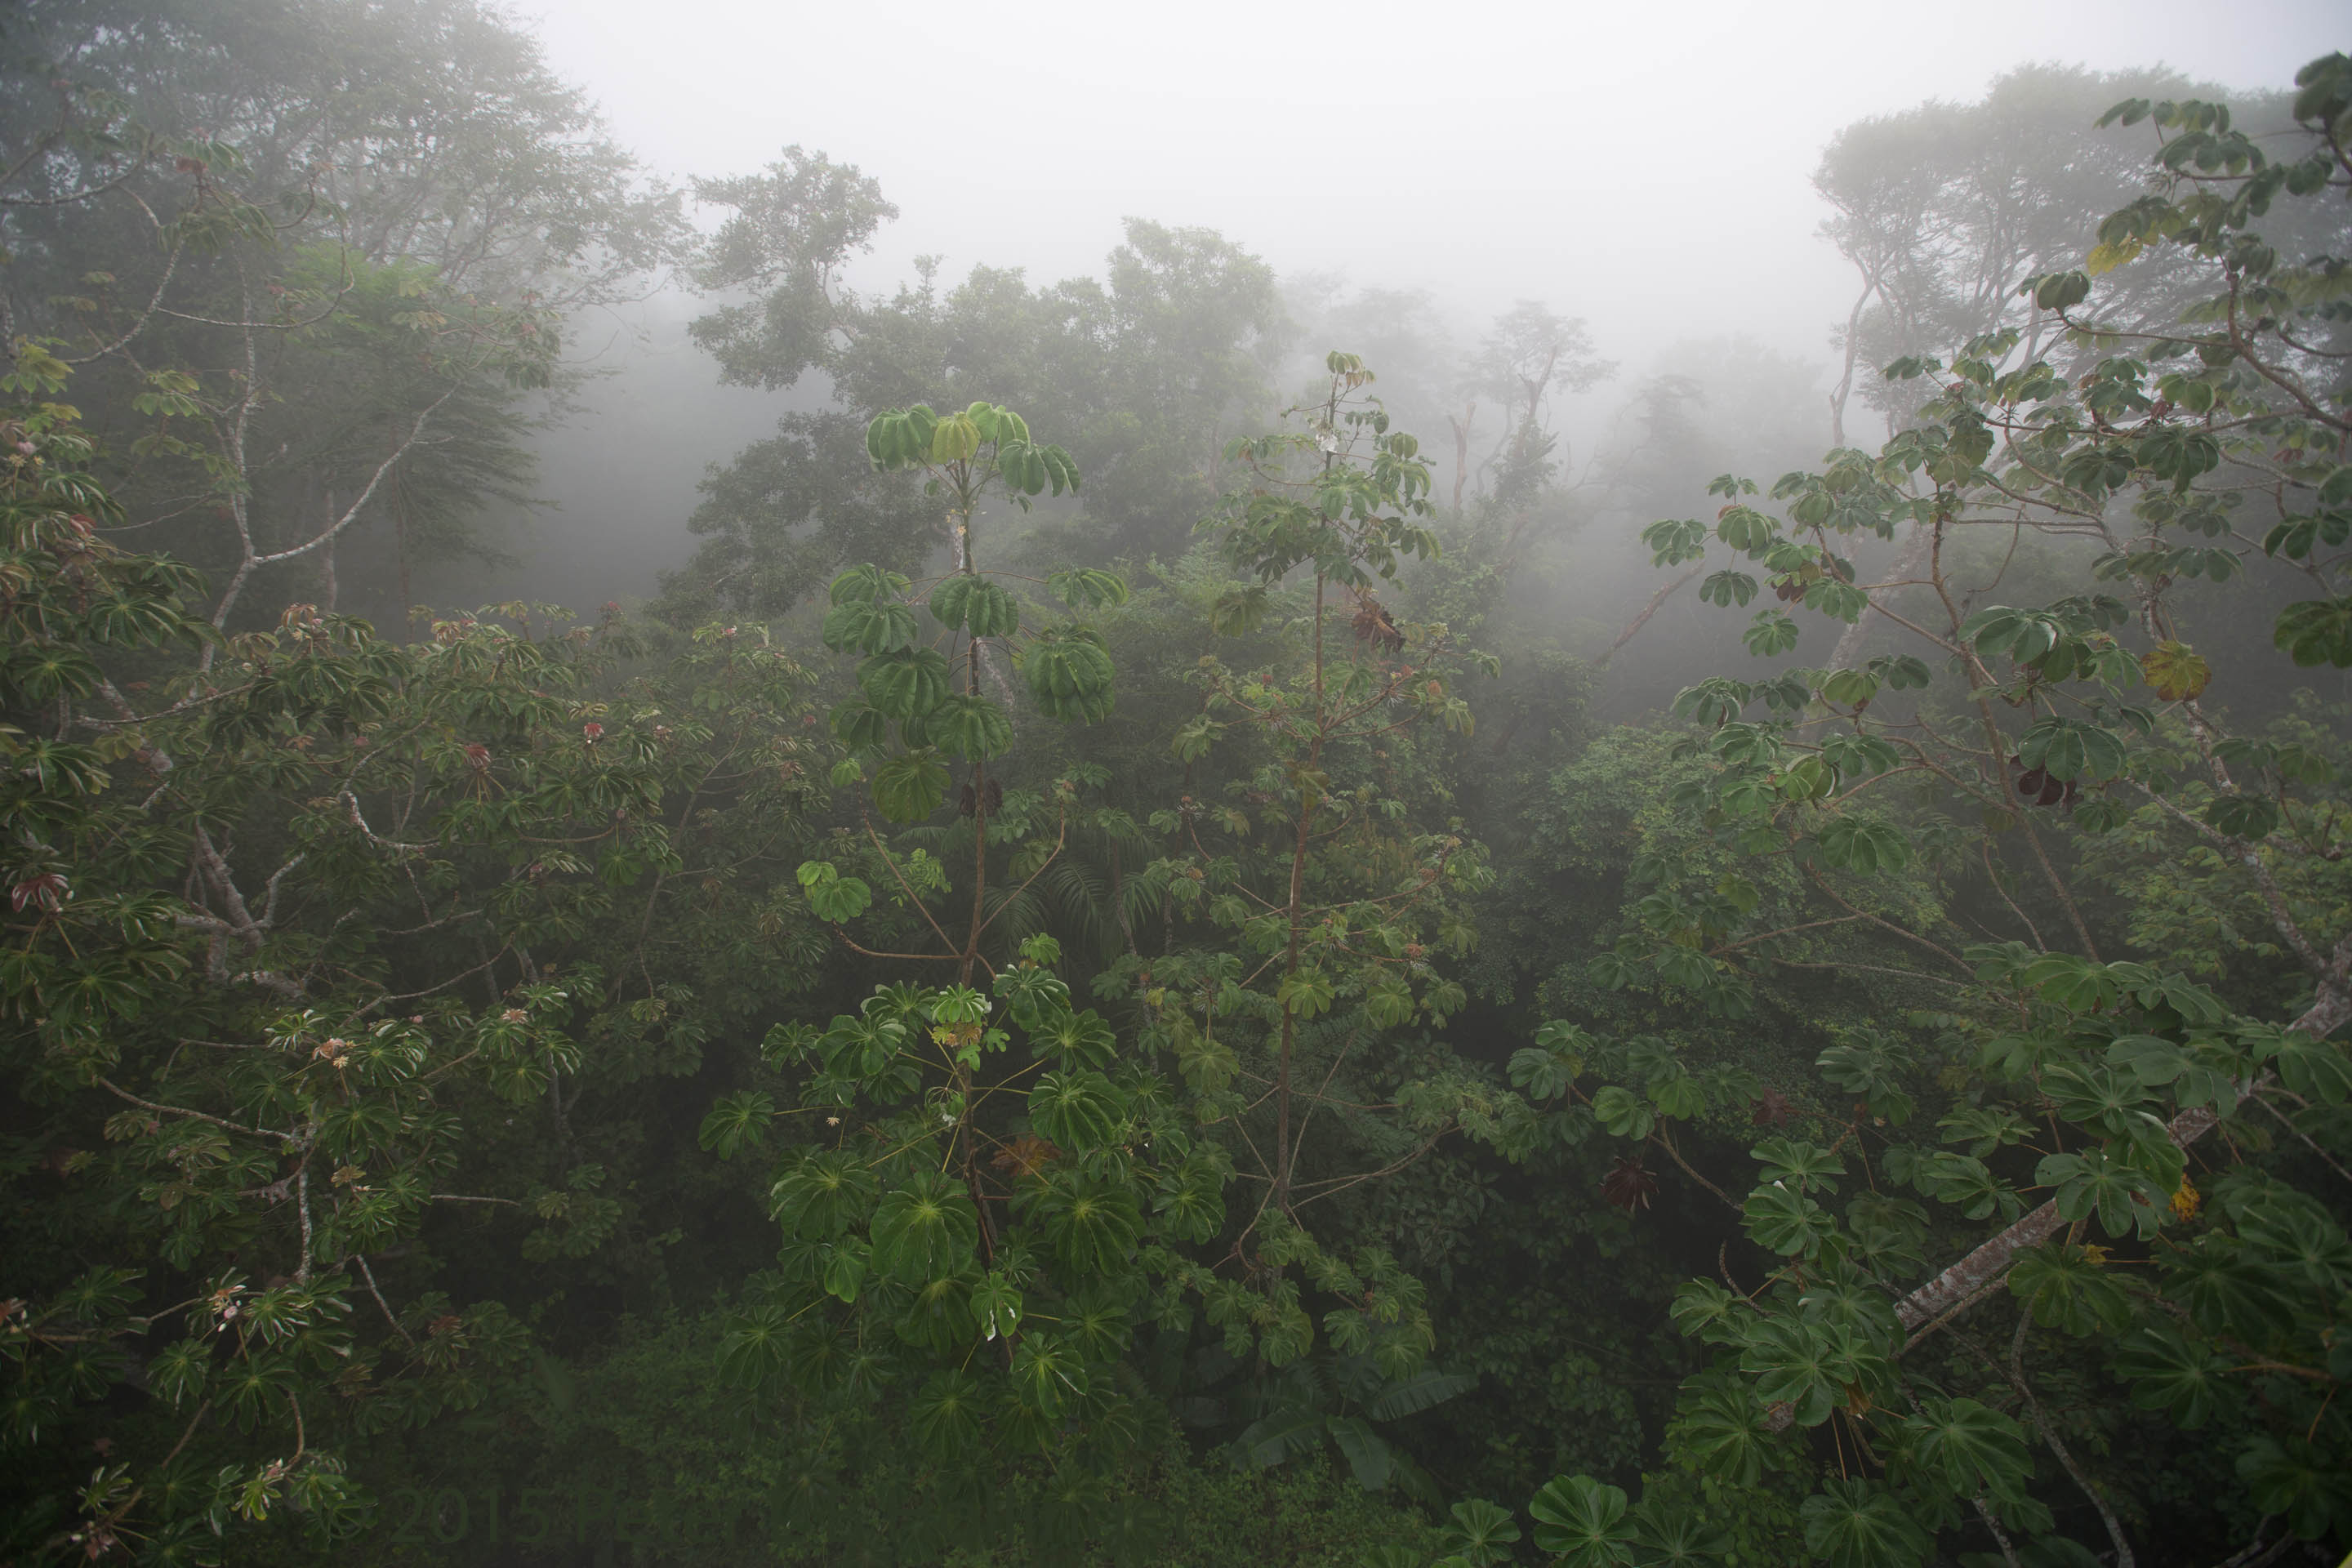 Cecropia trees on a misty morning (50%)